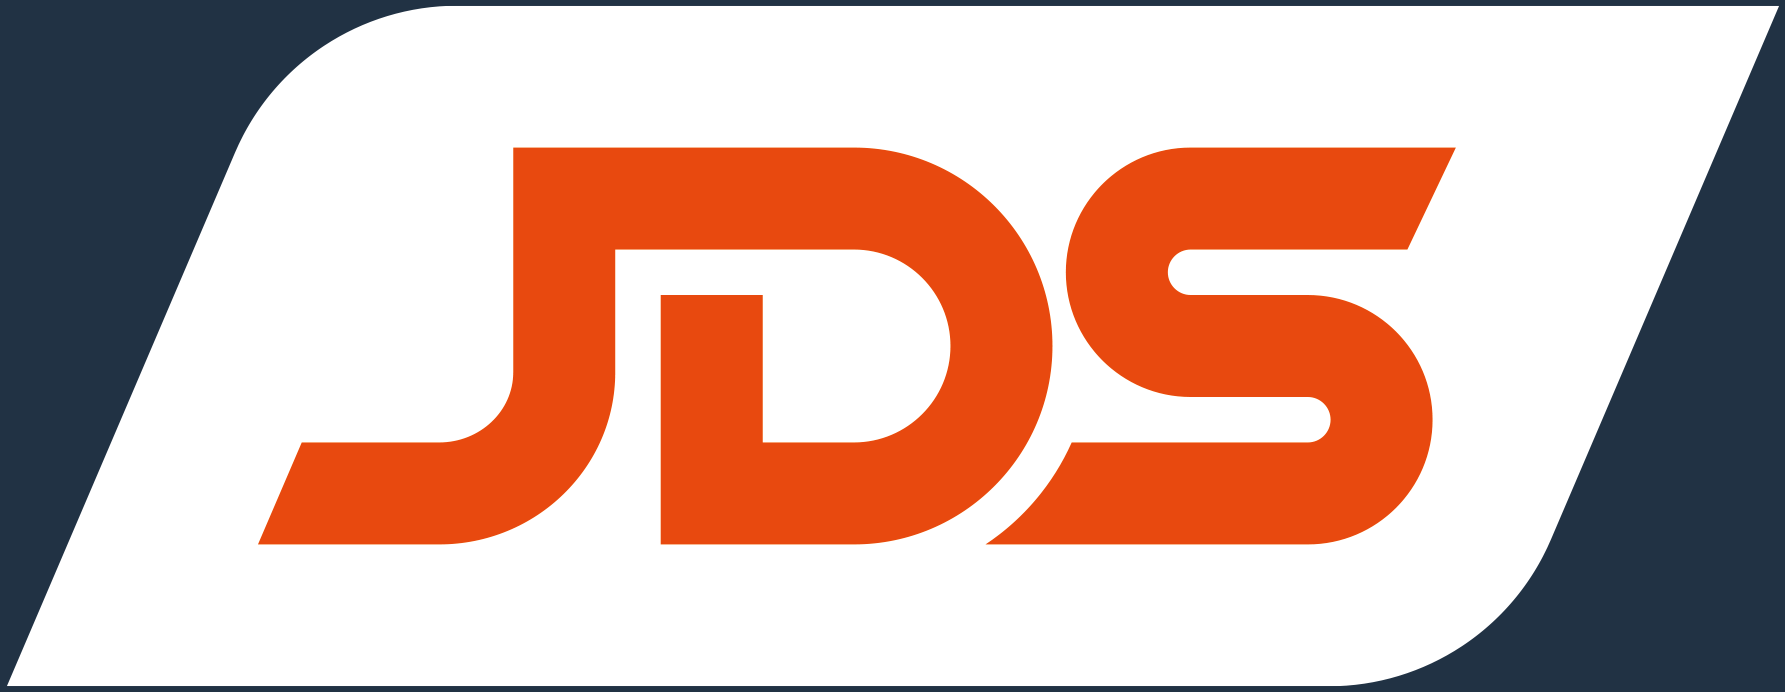 Logo of JDS DIY Home Improvement And Hardware Retail In Manchester, Greater Manchester